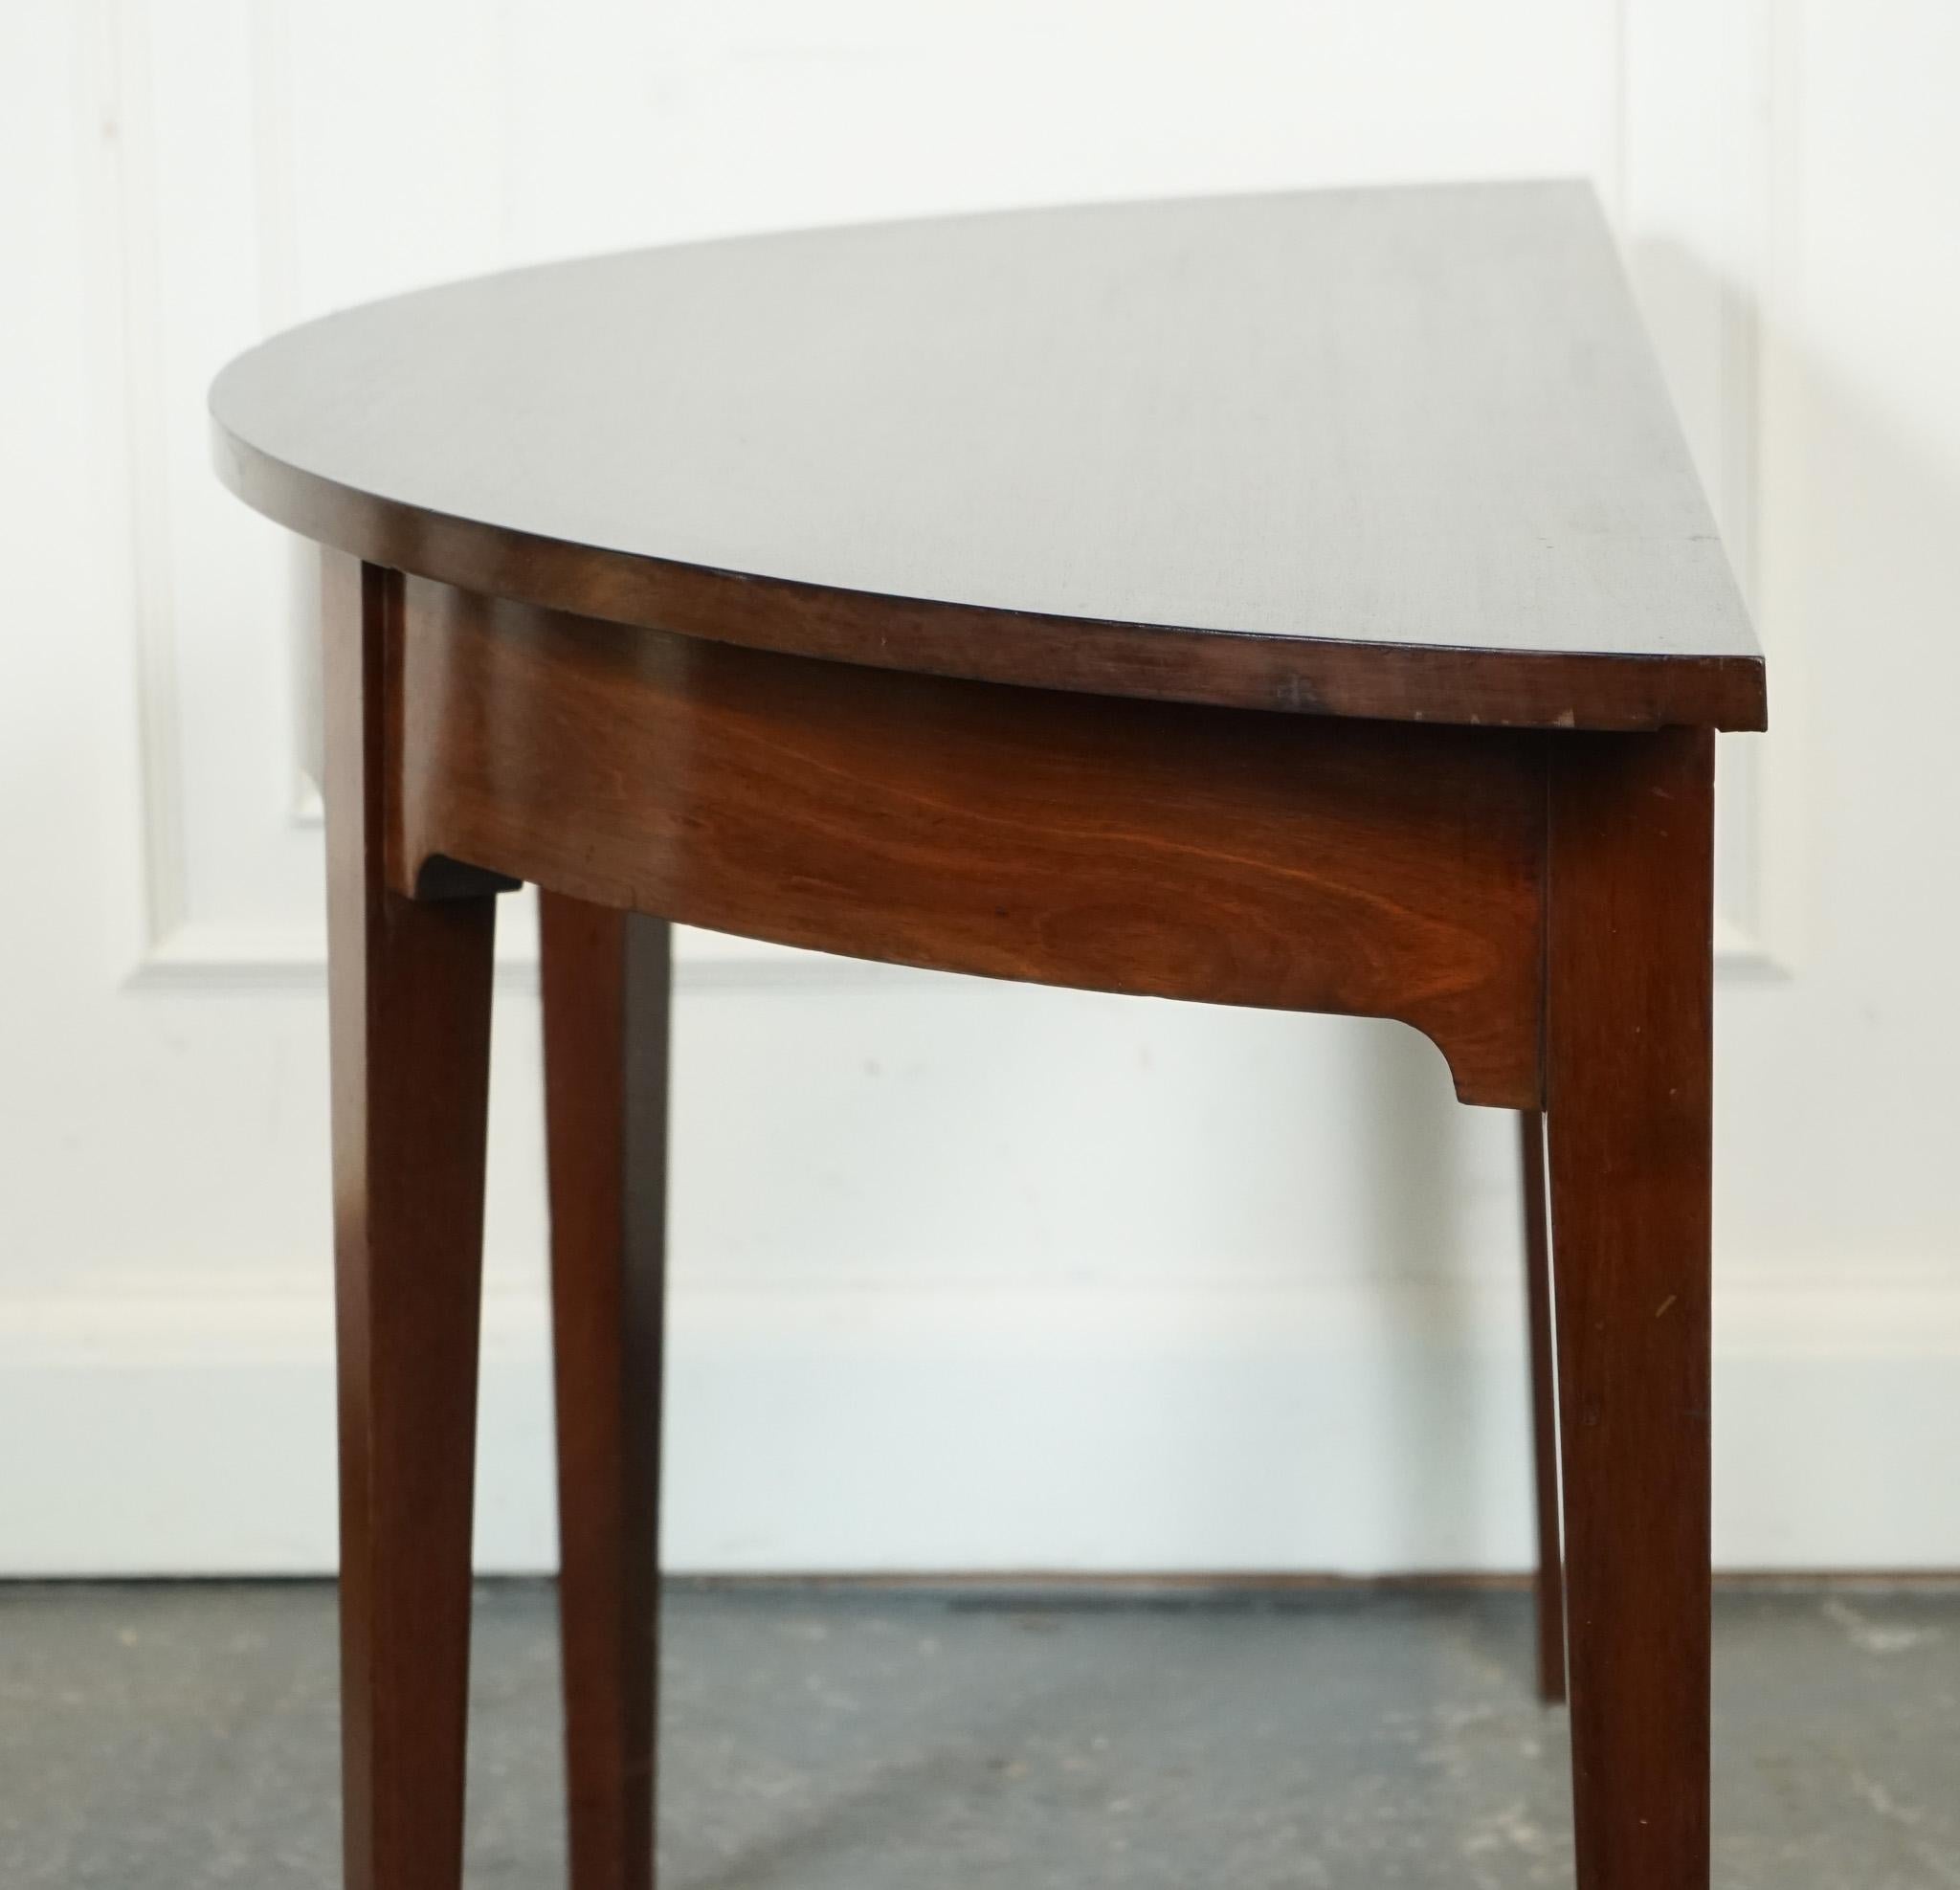 CIRCA 1800 GEORGE III DEMI LUNE HALL SiDE END TABLE J1 For Sale 2